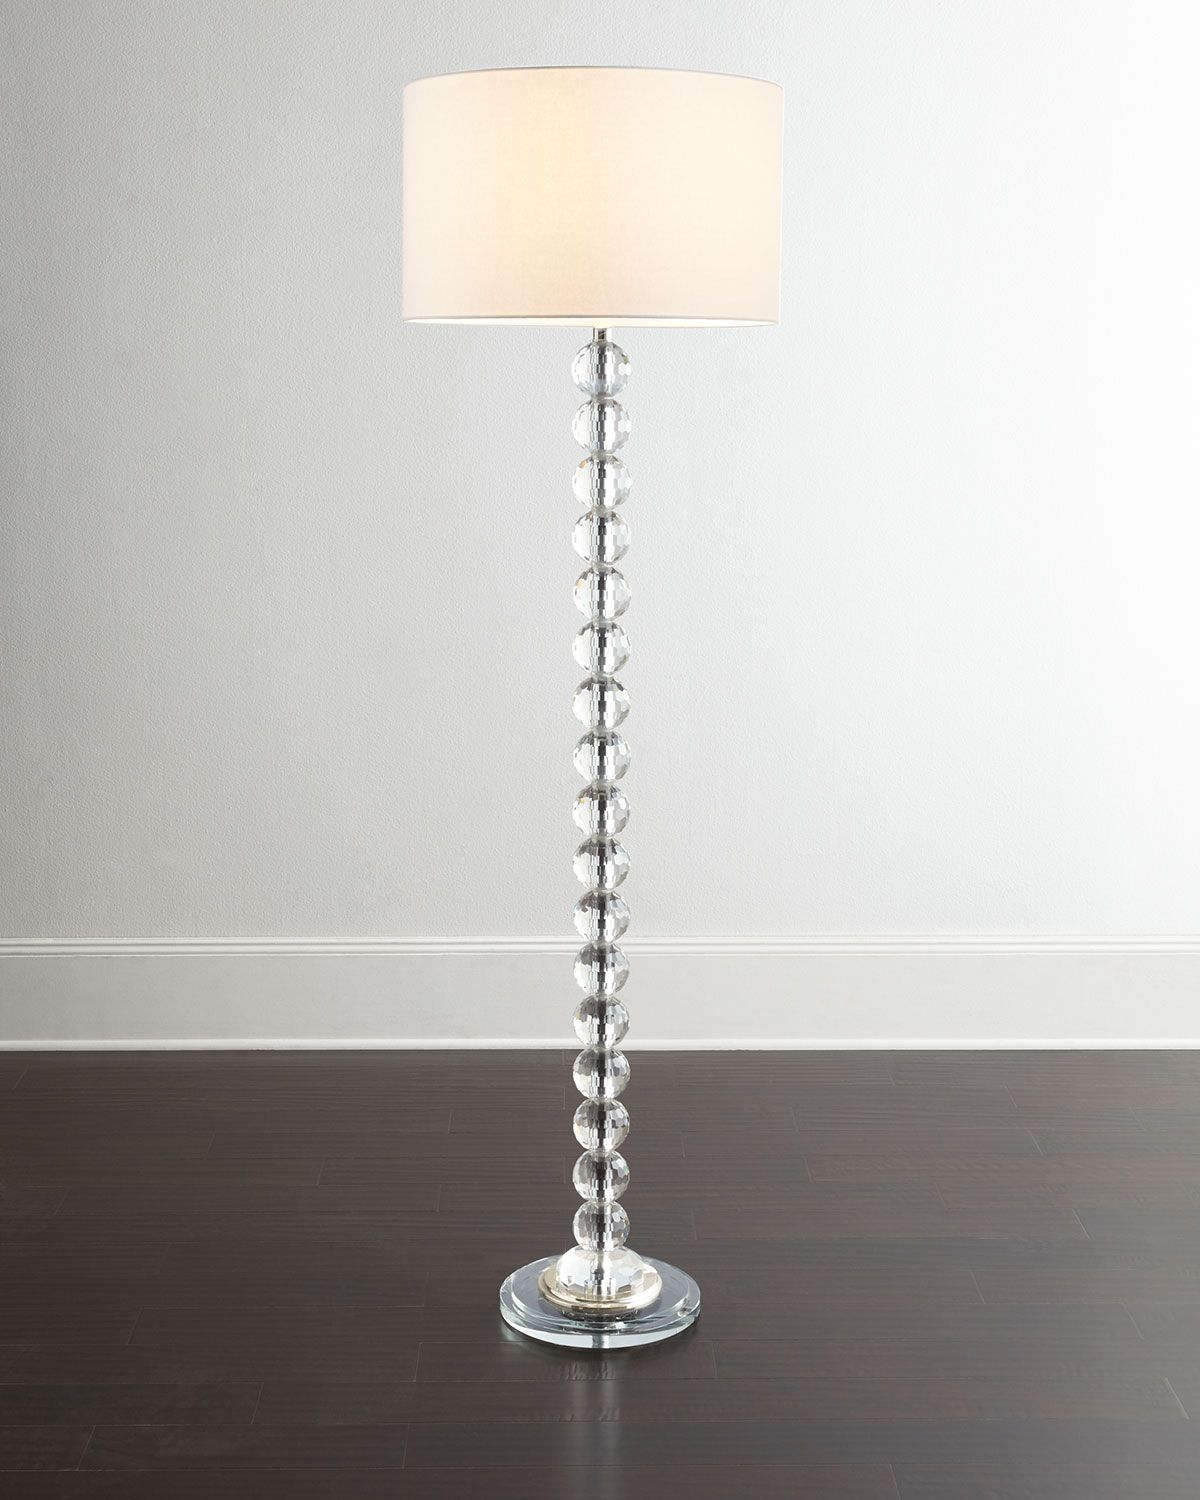 Stacked Crystal Floor Lamp Floor Lamp Lighting pertaining to sizing 1200 X 1500